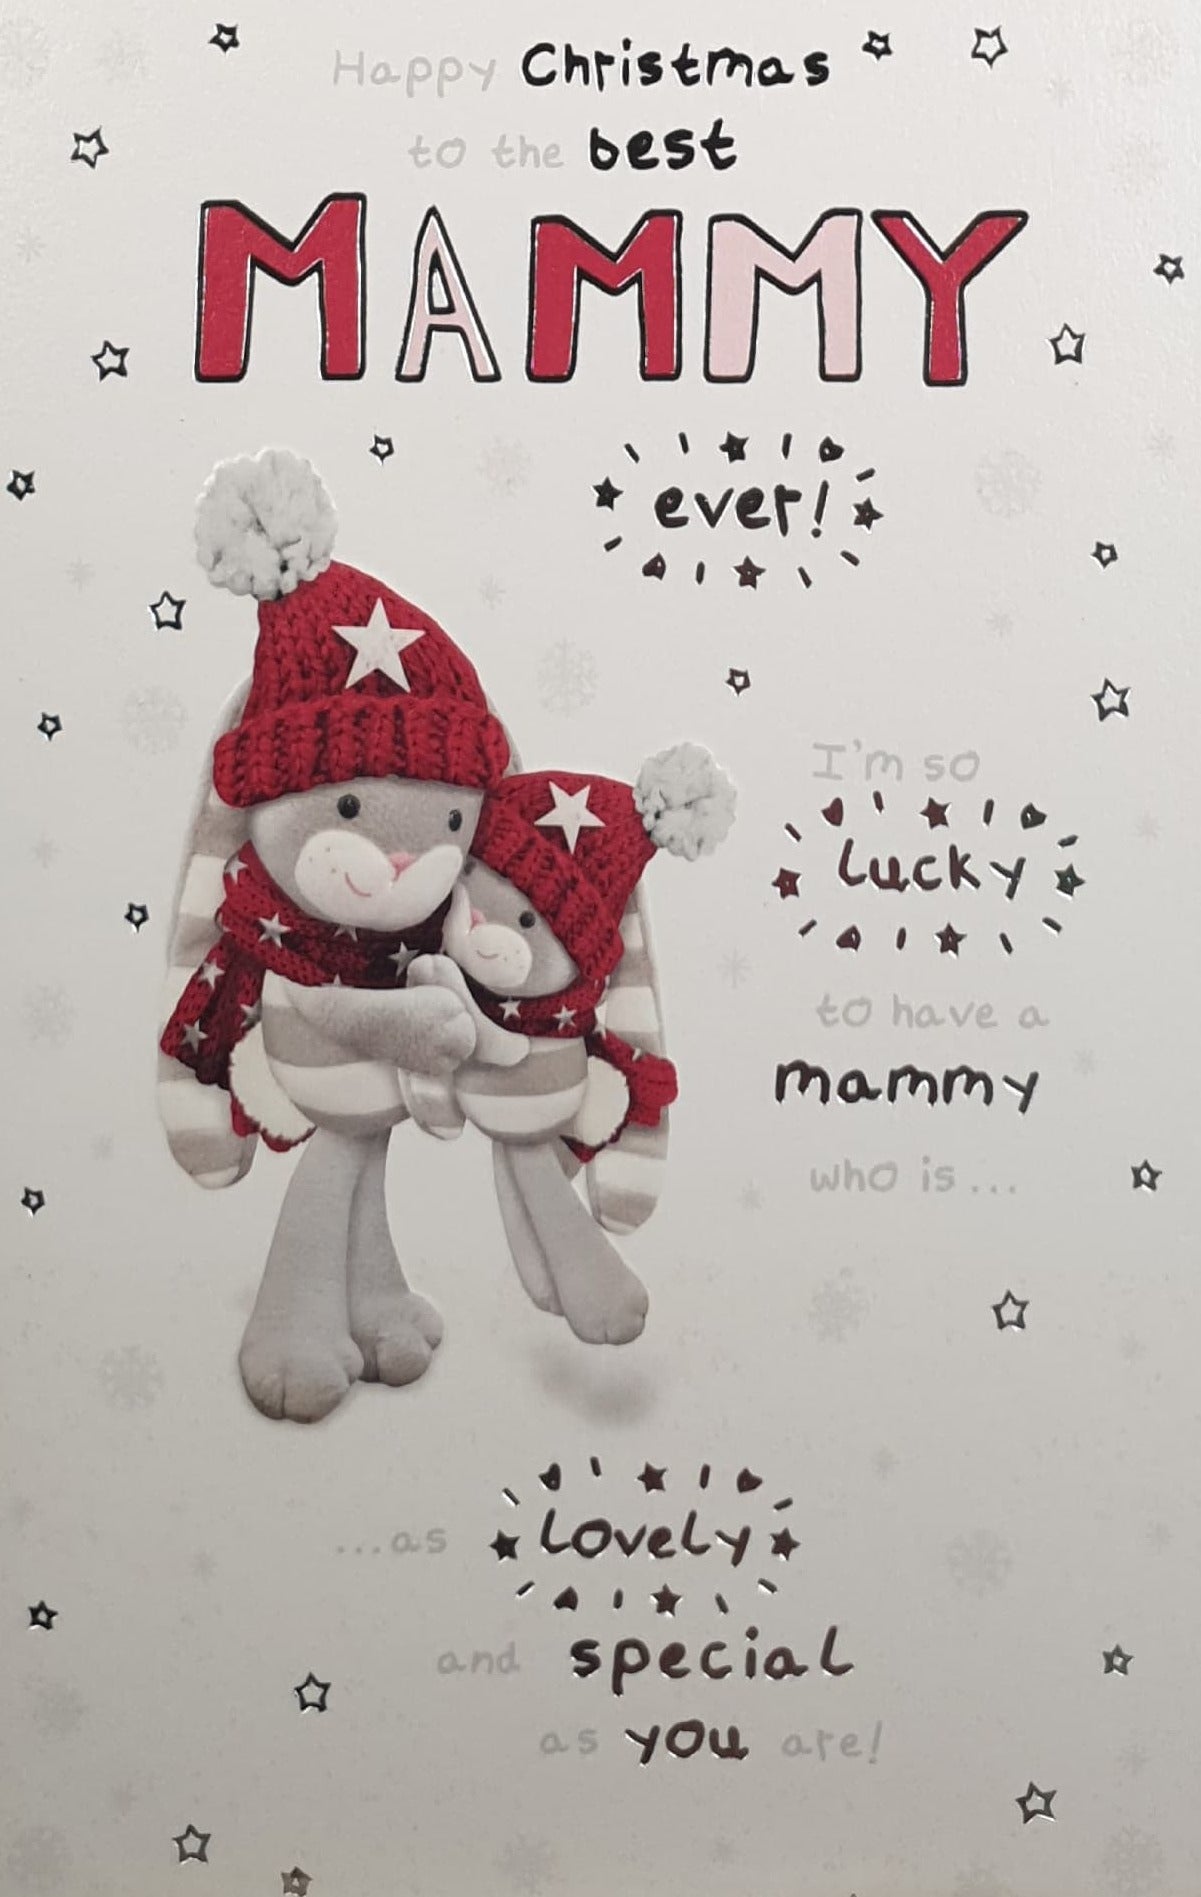 Mammy Christmas Card - I'm So Lucky... / Two Happy Bunnies in Woolly Hats